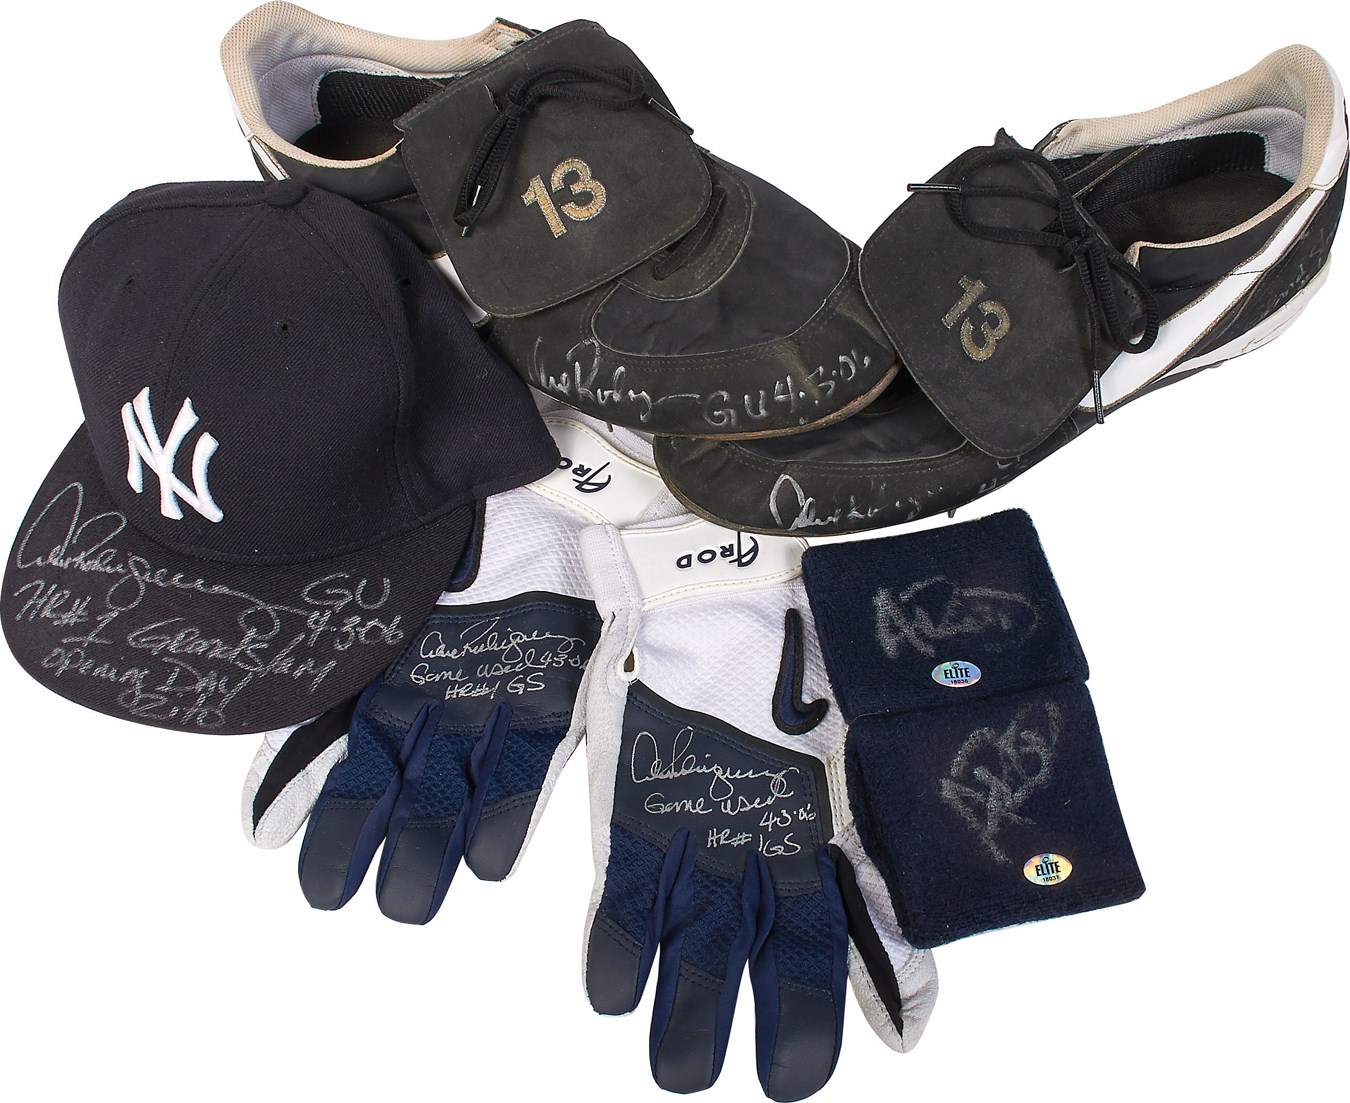 Baseball Equipment - 2006 Alex Rodriguez Game Used Opening Day "Grand Slam" Cap, Cleats & Gloves (Photomatched & A-Rod LOA)